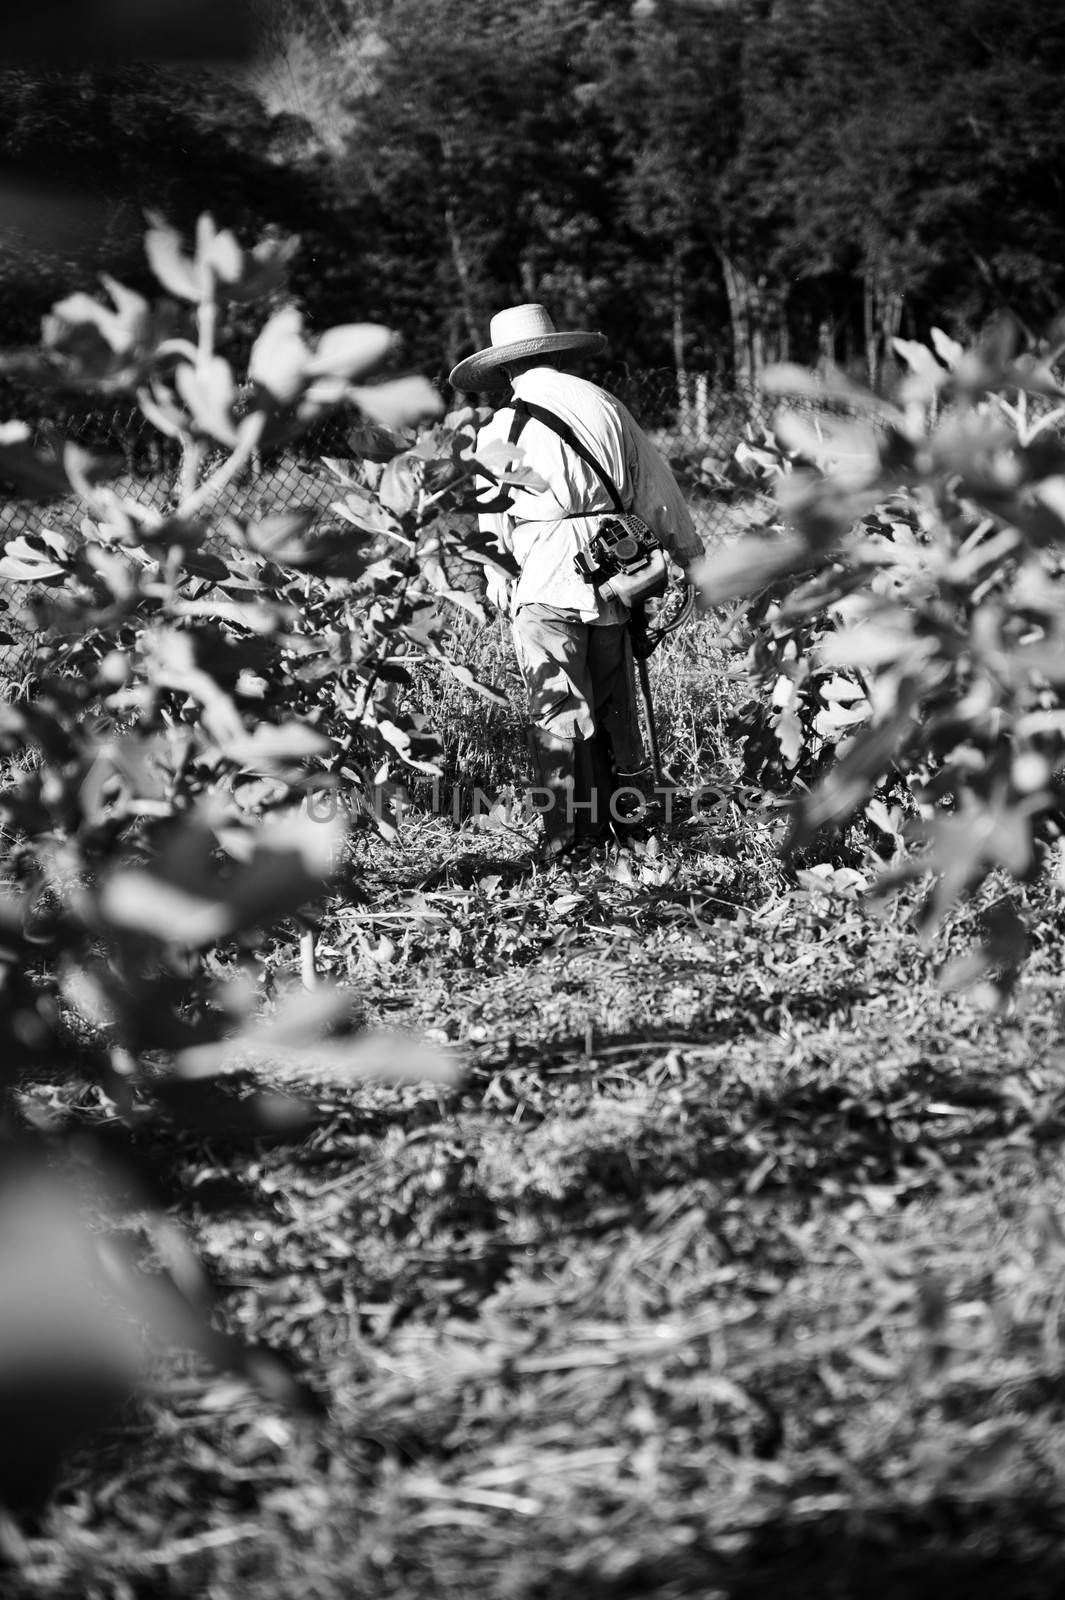 Working in a Fig Plantation by CelsoDiniz